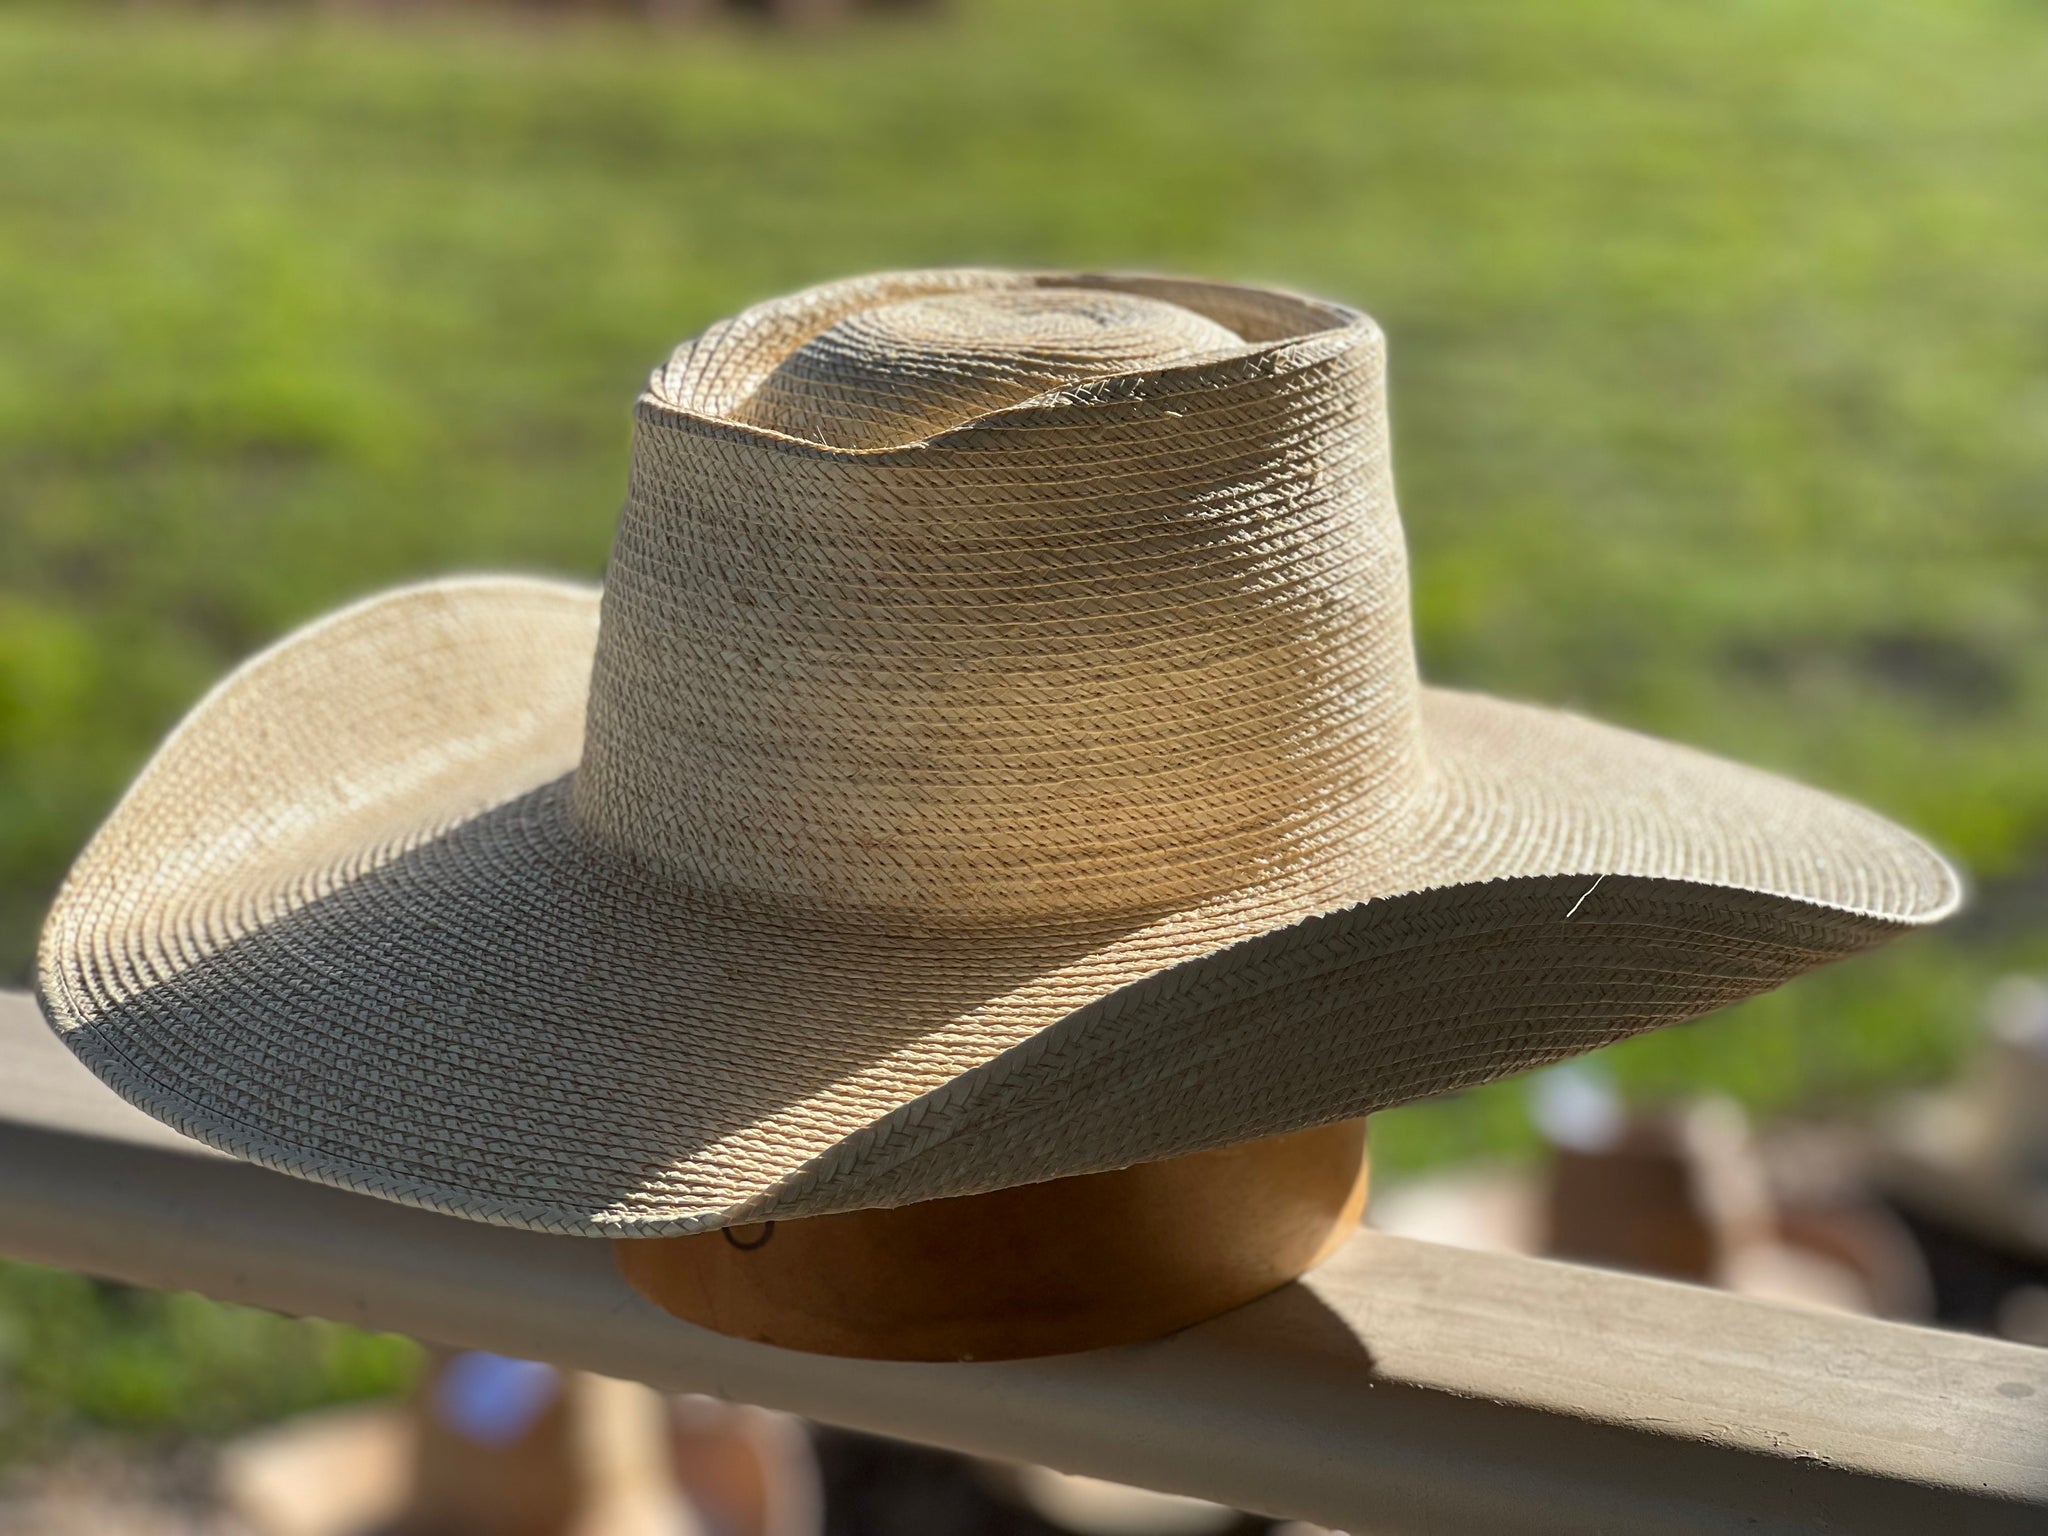 Jaxonbilt_Hats_are_Australian_made_palm_leaf_hats_and_crossbred_hats_for_cowgirls_and_cowboys_with_wide_brims_for_sun_protection_5”_brim_trim_on_edge_wide_crown_band_Ben’s_Classic_shape_light_palm_5”_brim